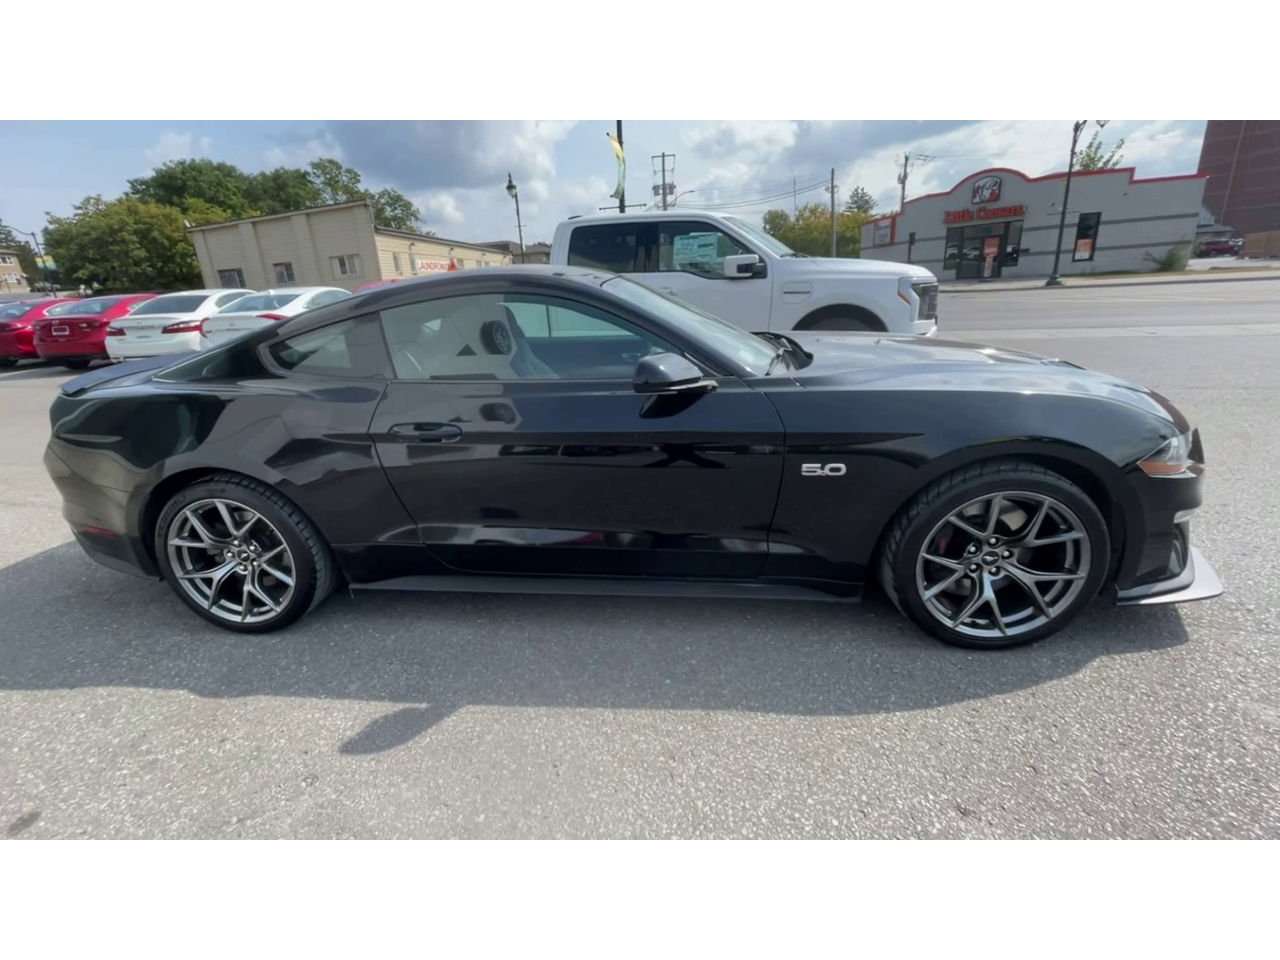 2019 Ford Mustang - P21400 Full Image 9